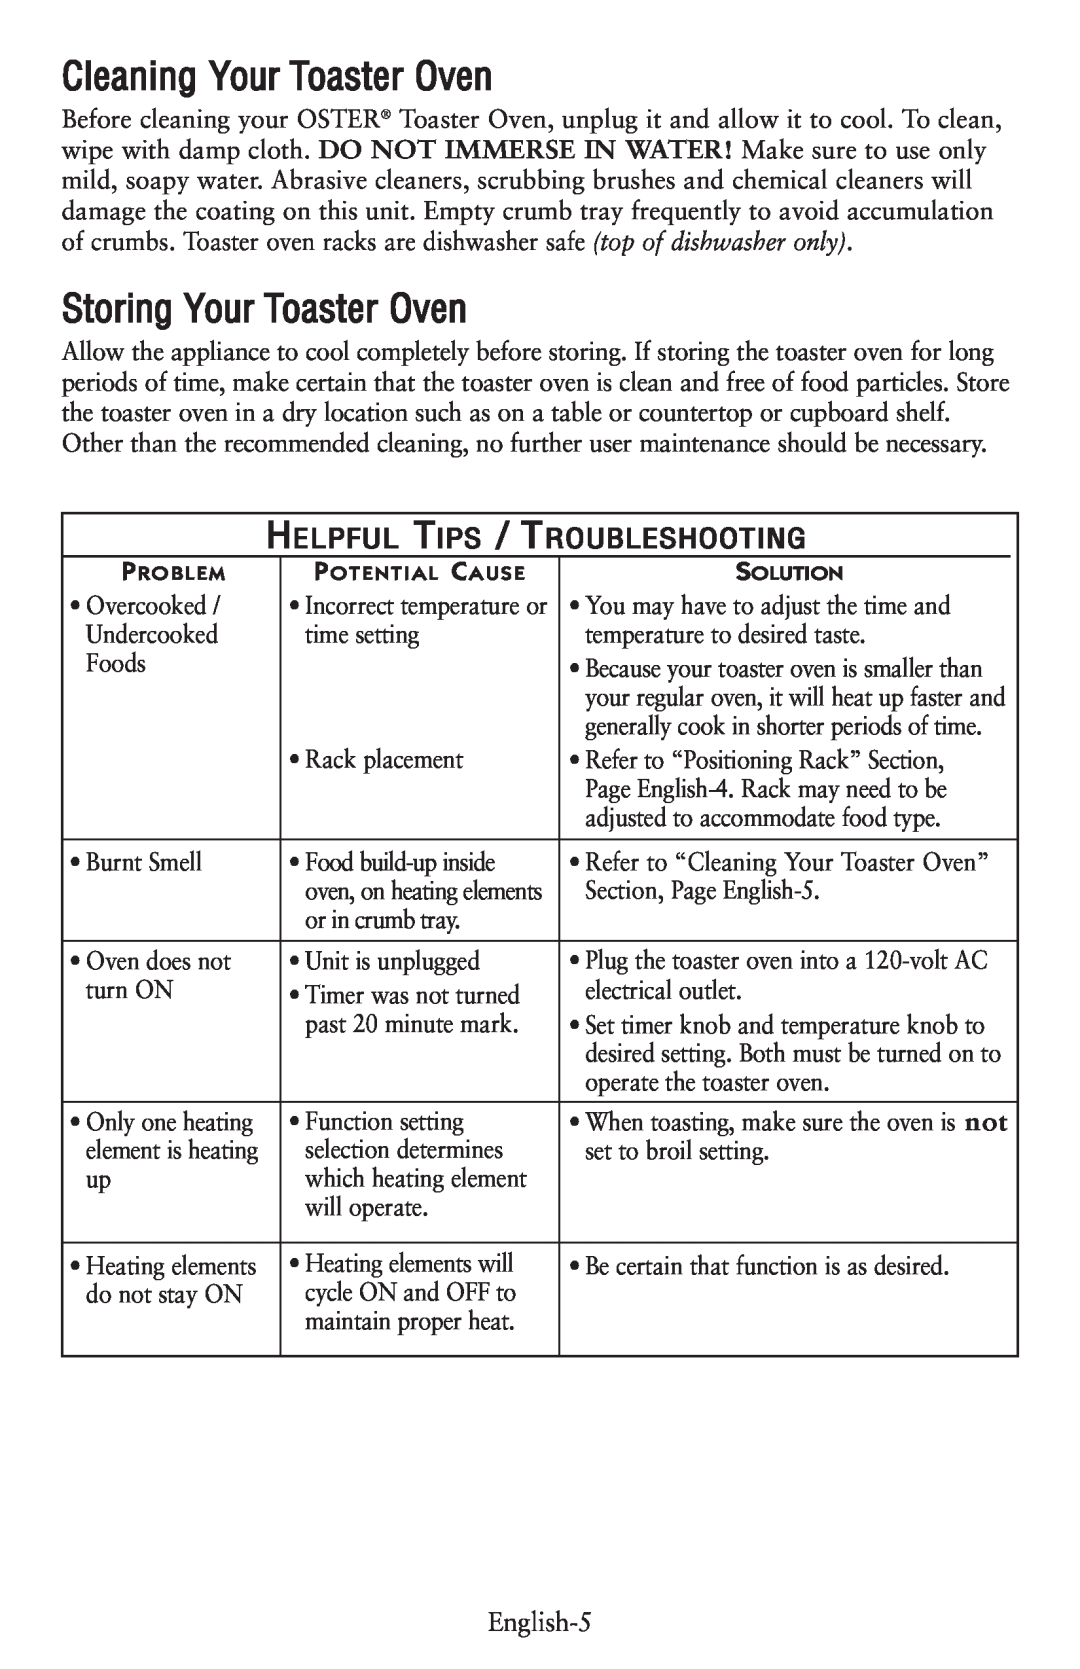 Oster 6056, 119308 user manual Cleaning Your Toaster Oven, Storing Your Toaster Oven, Helpful Tips / Troubleshooting 